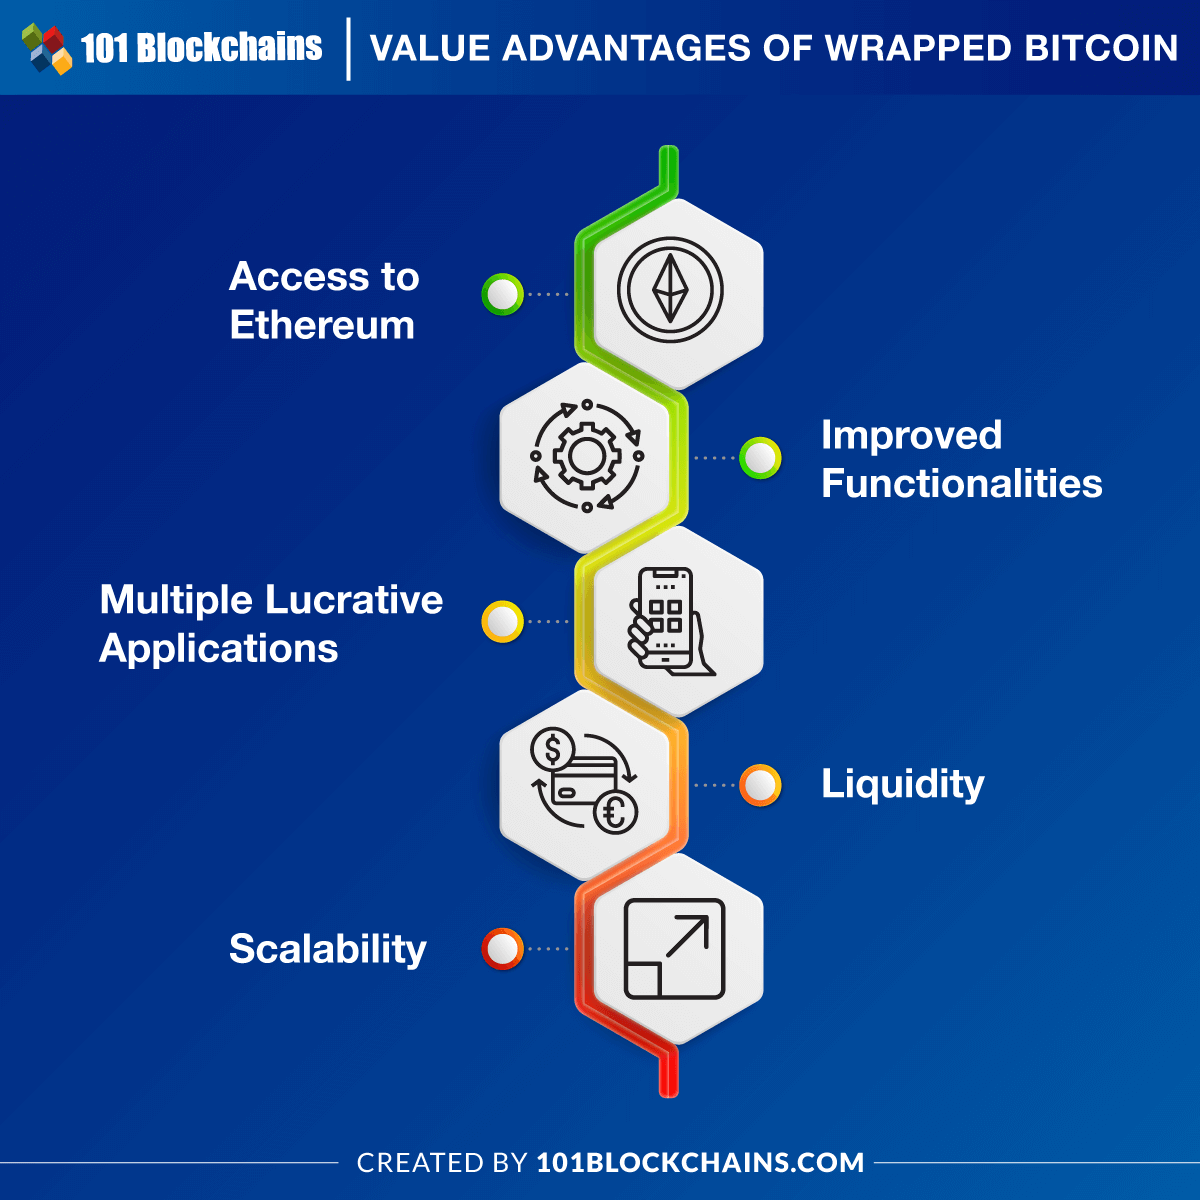 Value Advantages of Wrapped Bitcoin